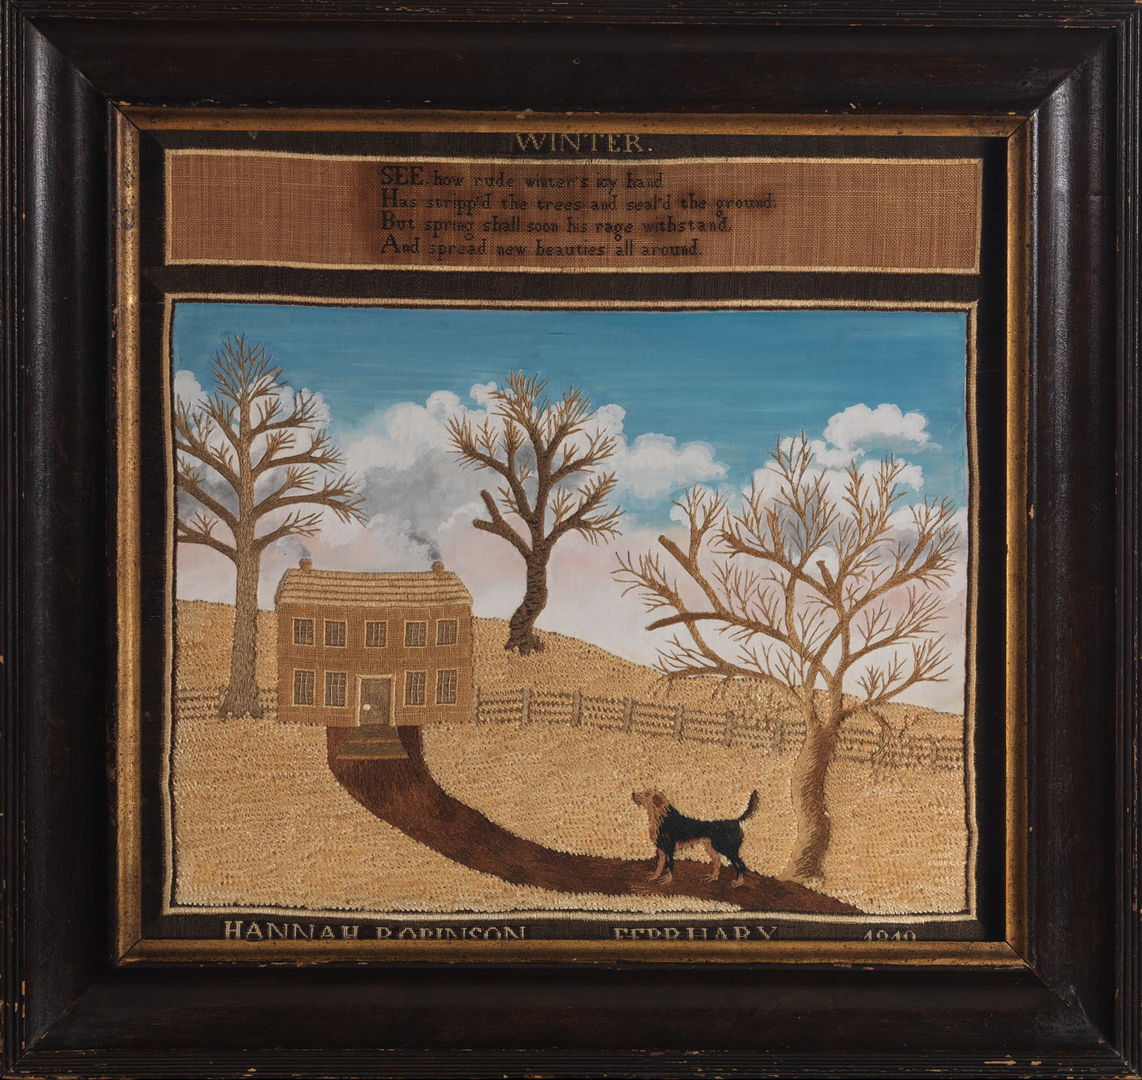 Image of a needlework picture by Lucy Huntington showing a winter landscape embroidered on cloth with a black wooden frame. In the scene a dog follows a brown dirt road towards a small cabin with on the top of a hill covered in dried yellow grass. Three trees stand stall against a blue sky with white clouds.